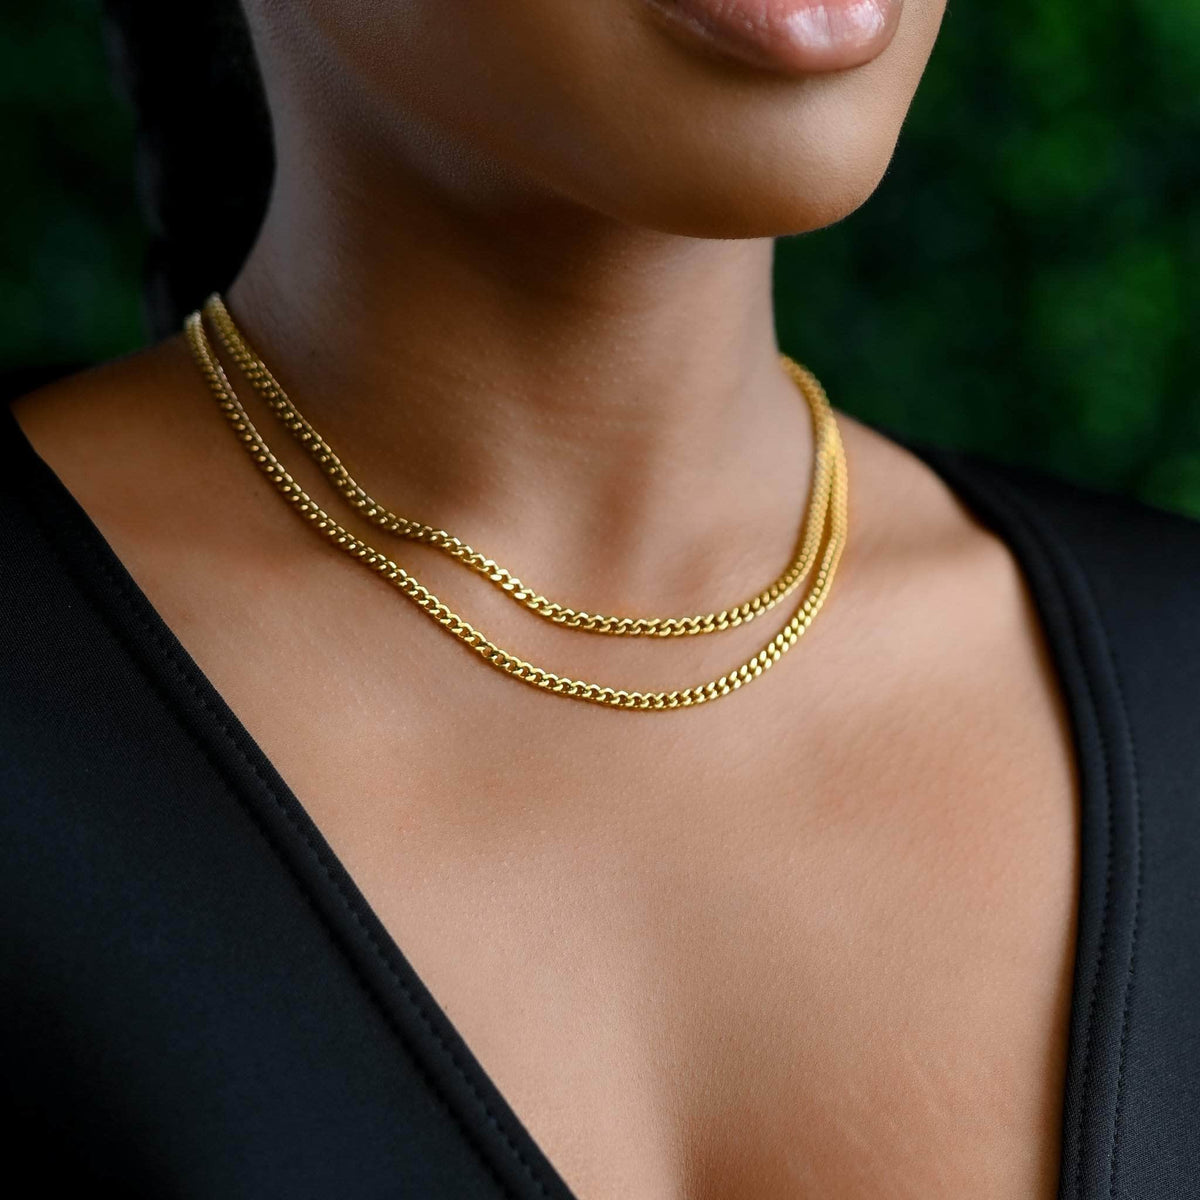 Buy Aimimier Italian Layered Flat Herringbone Chain Choker Necklace Snake  Magic Necklace Prom Party Festival Accessories for Women and Girls (Gold)  at Amazon.in